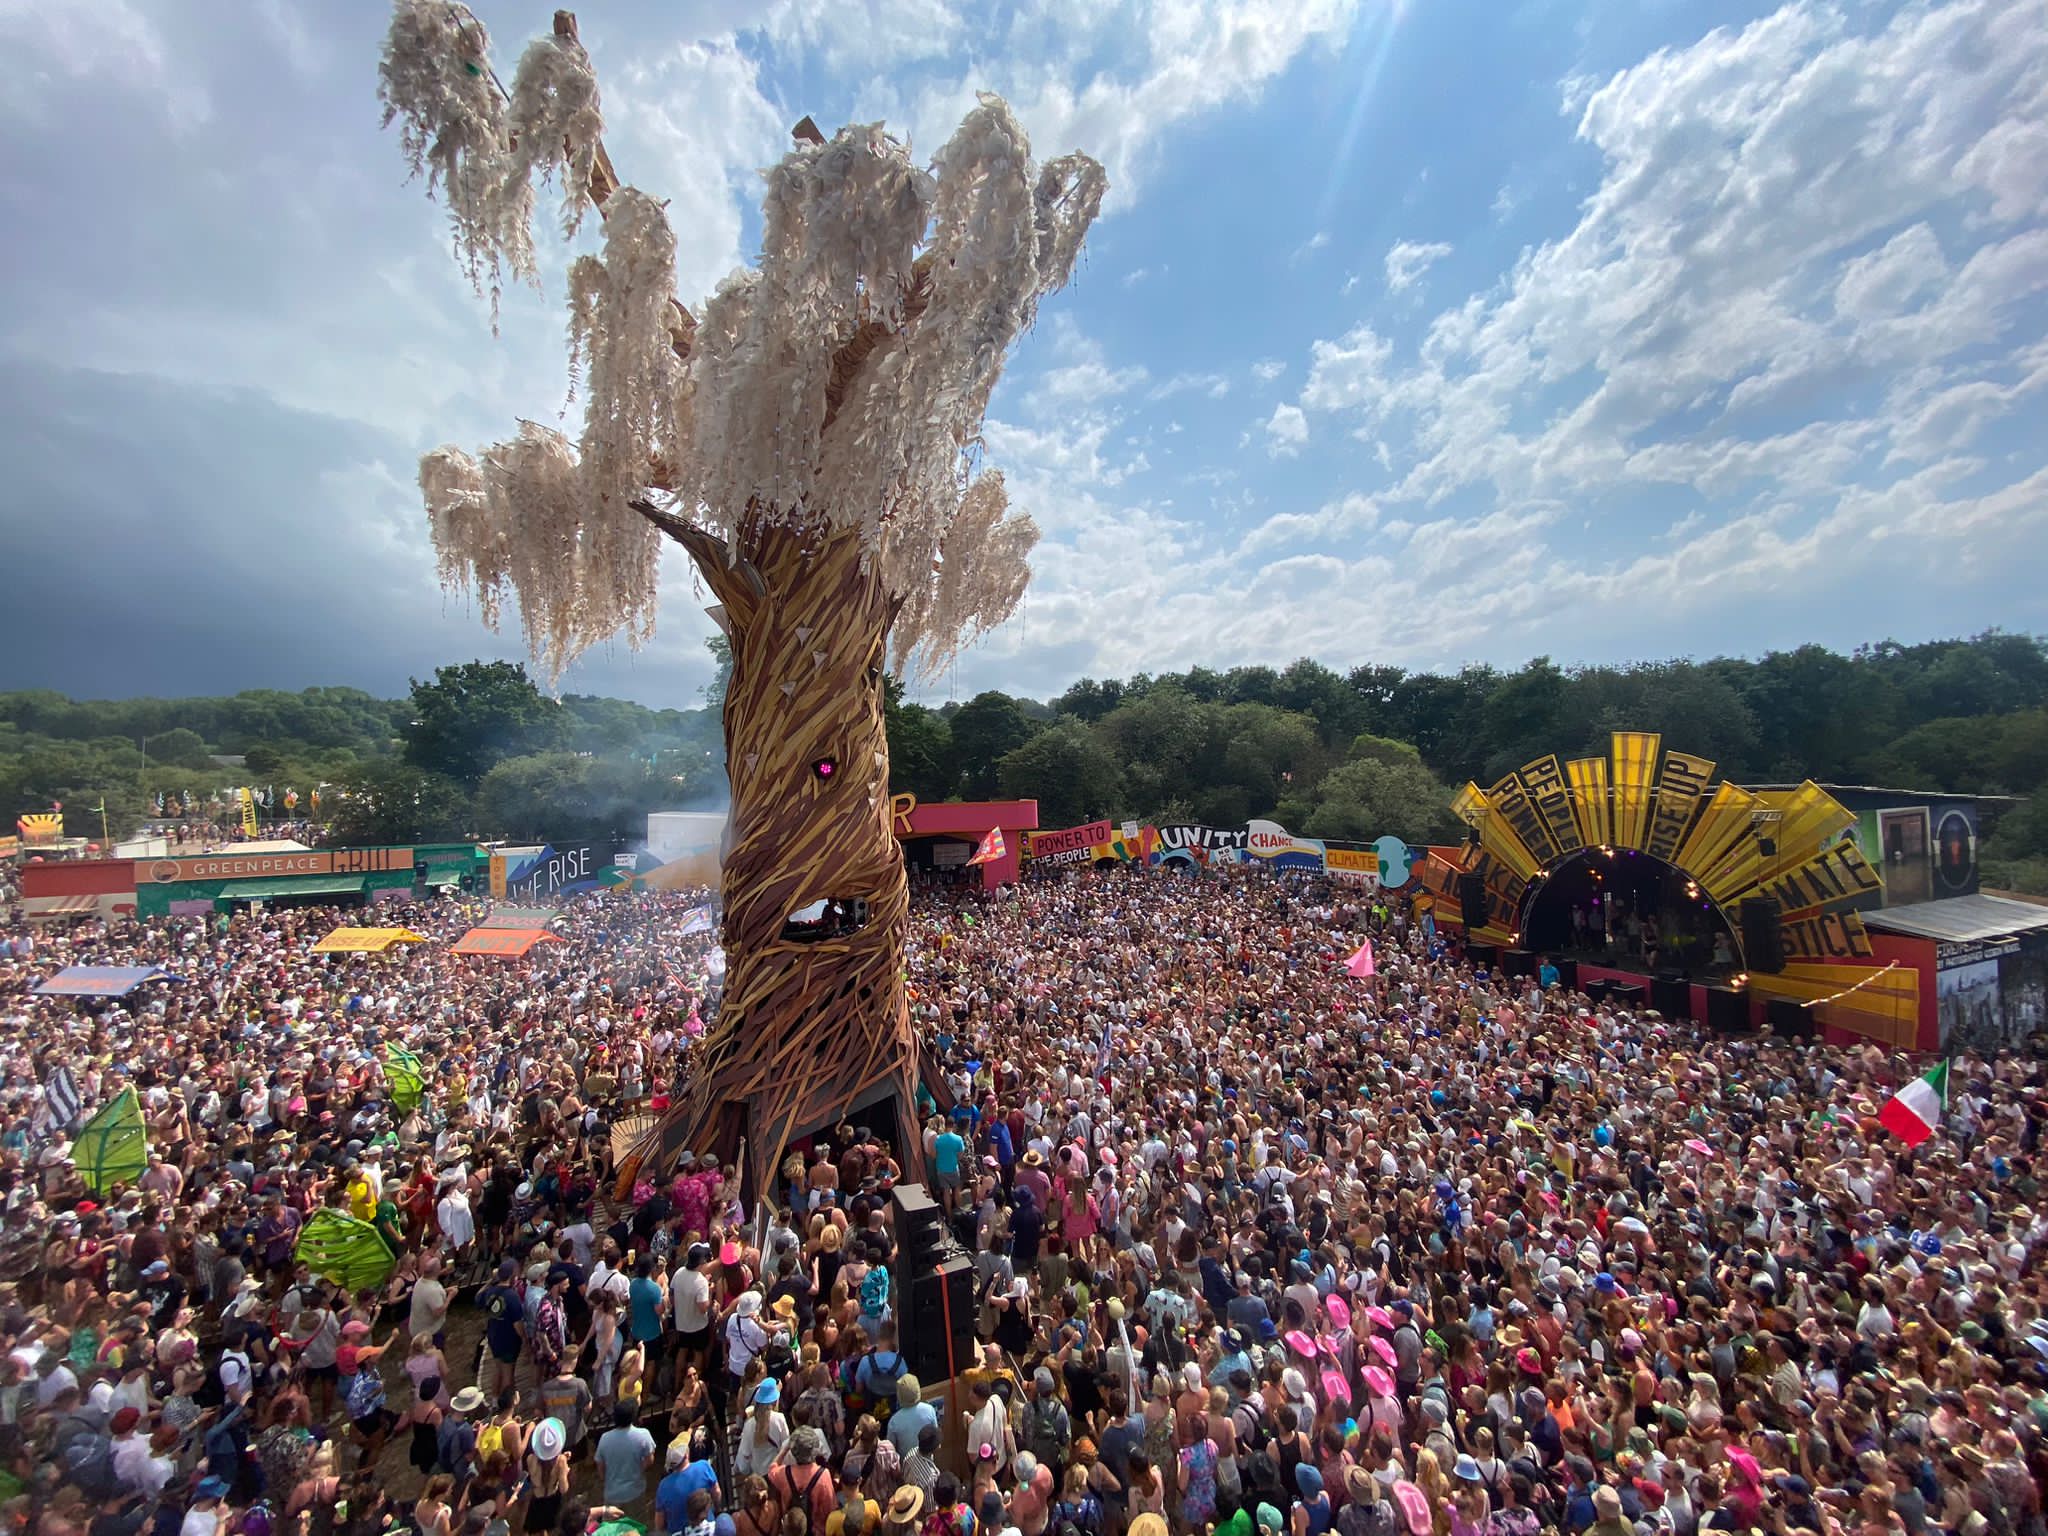 Fatboy Slim performs at the Rave Tree in Glastonbury’s Greenpeace Field, 2023